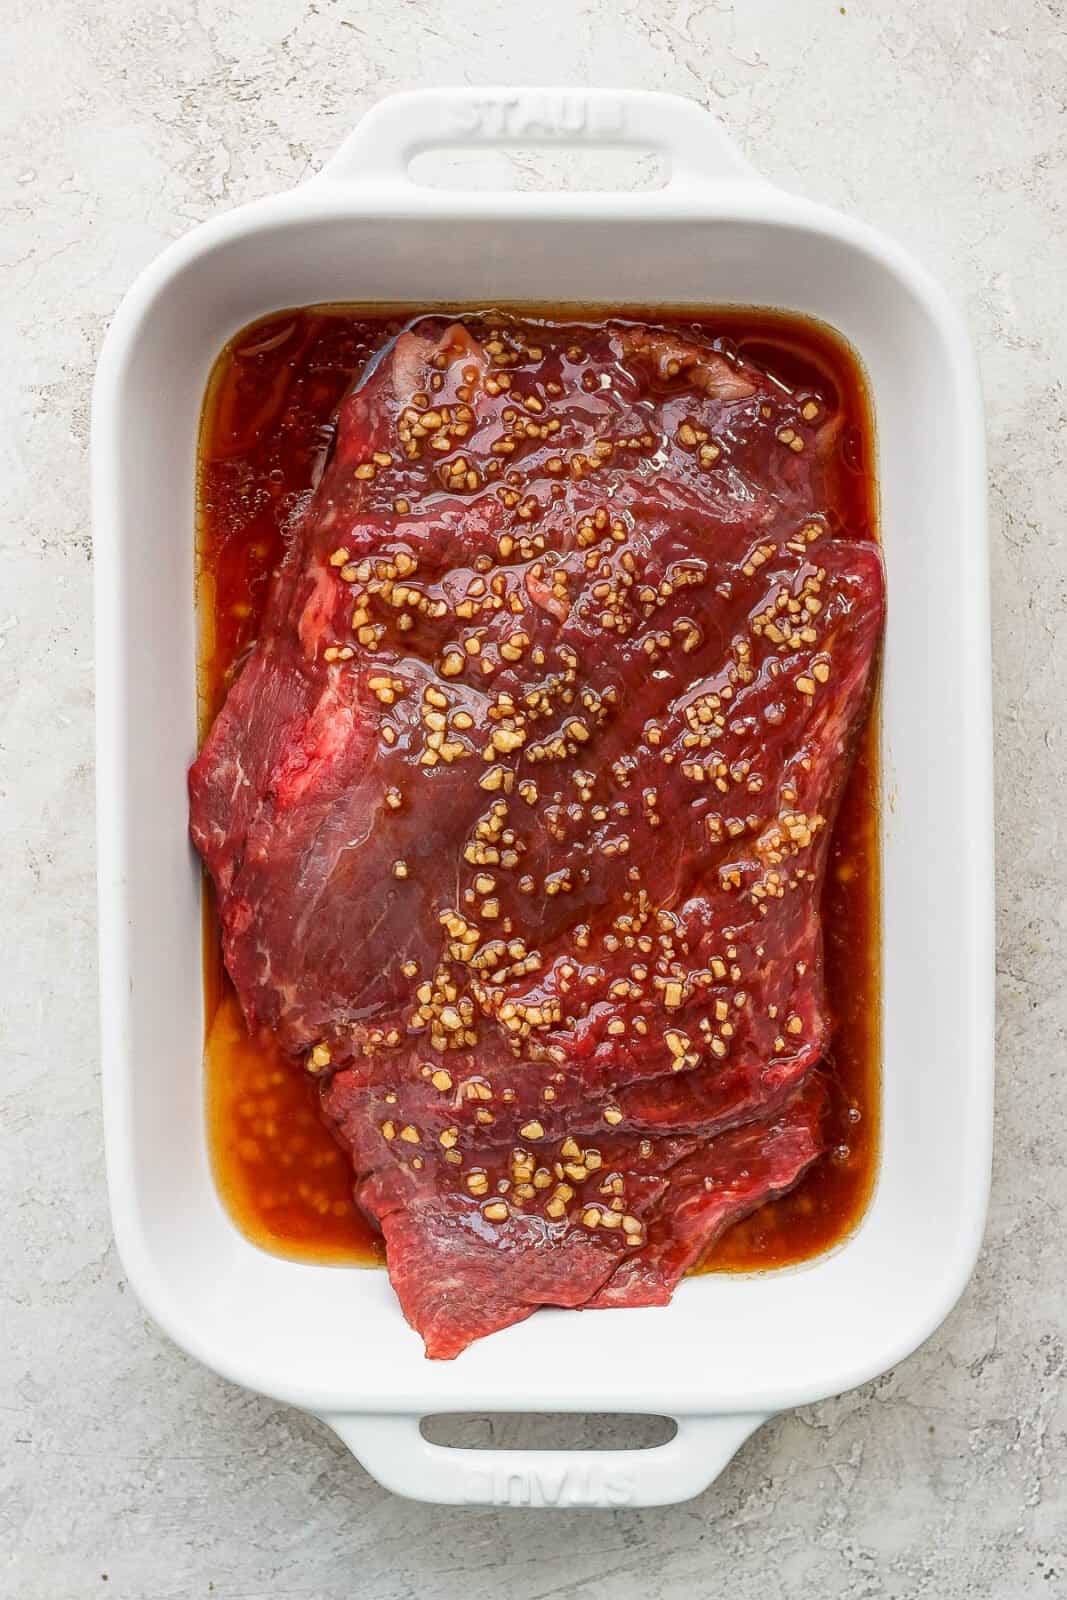 A flank steak sitting in a baking dish covered in a marinade.